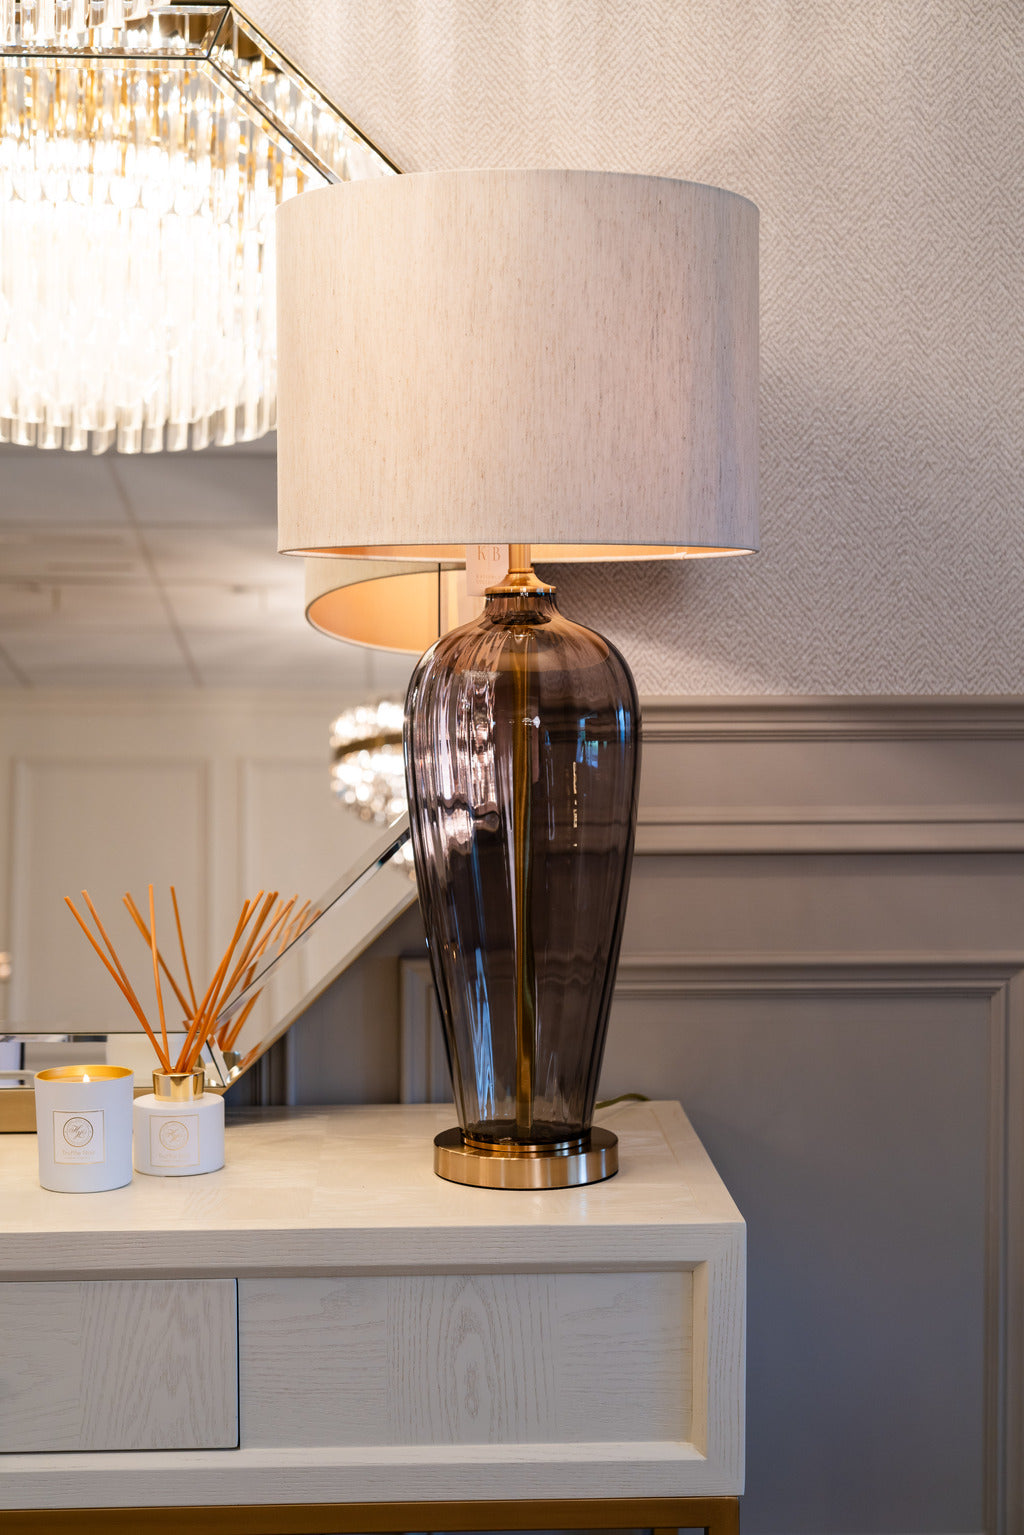 Statement lamps, Large lamps, Gold and black lamps, Lighting, Interiors, Table lamp, Gold table lamp, Decor